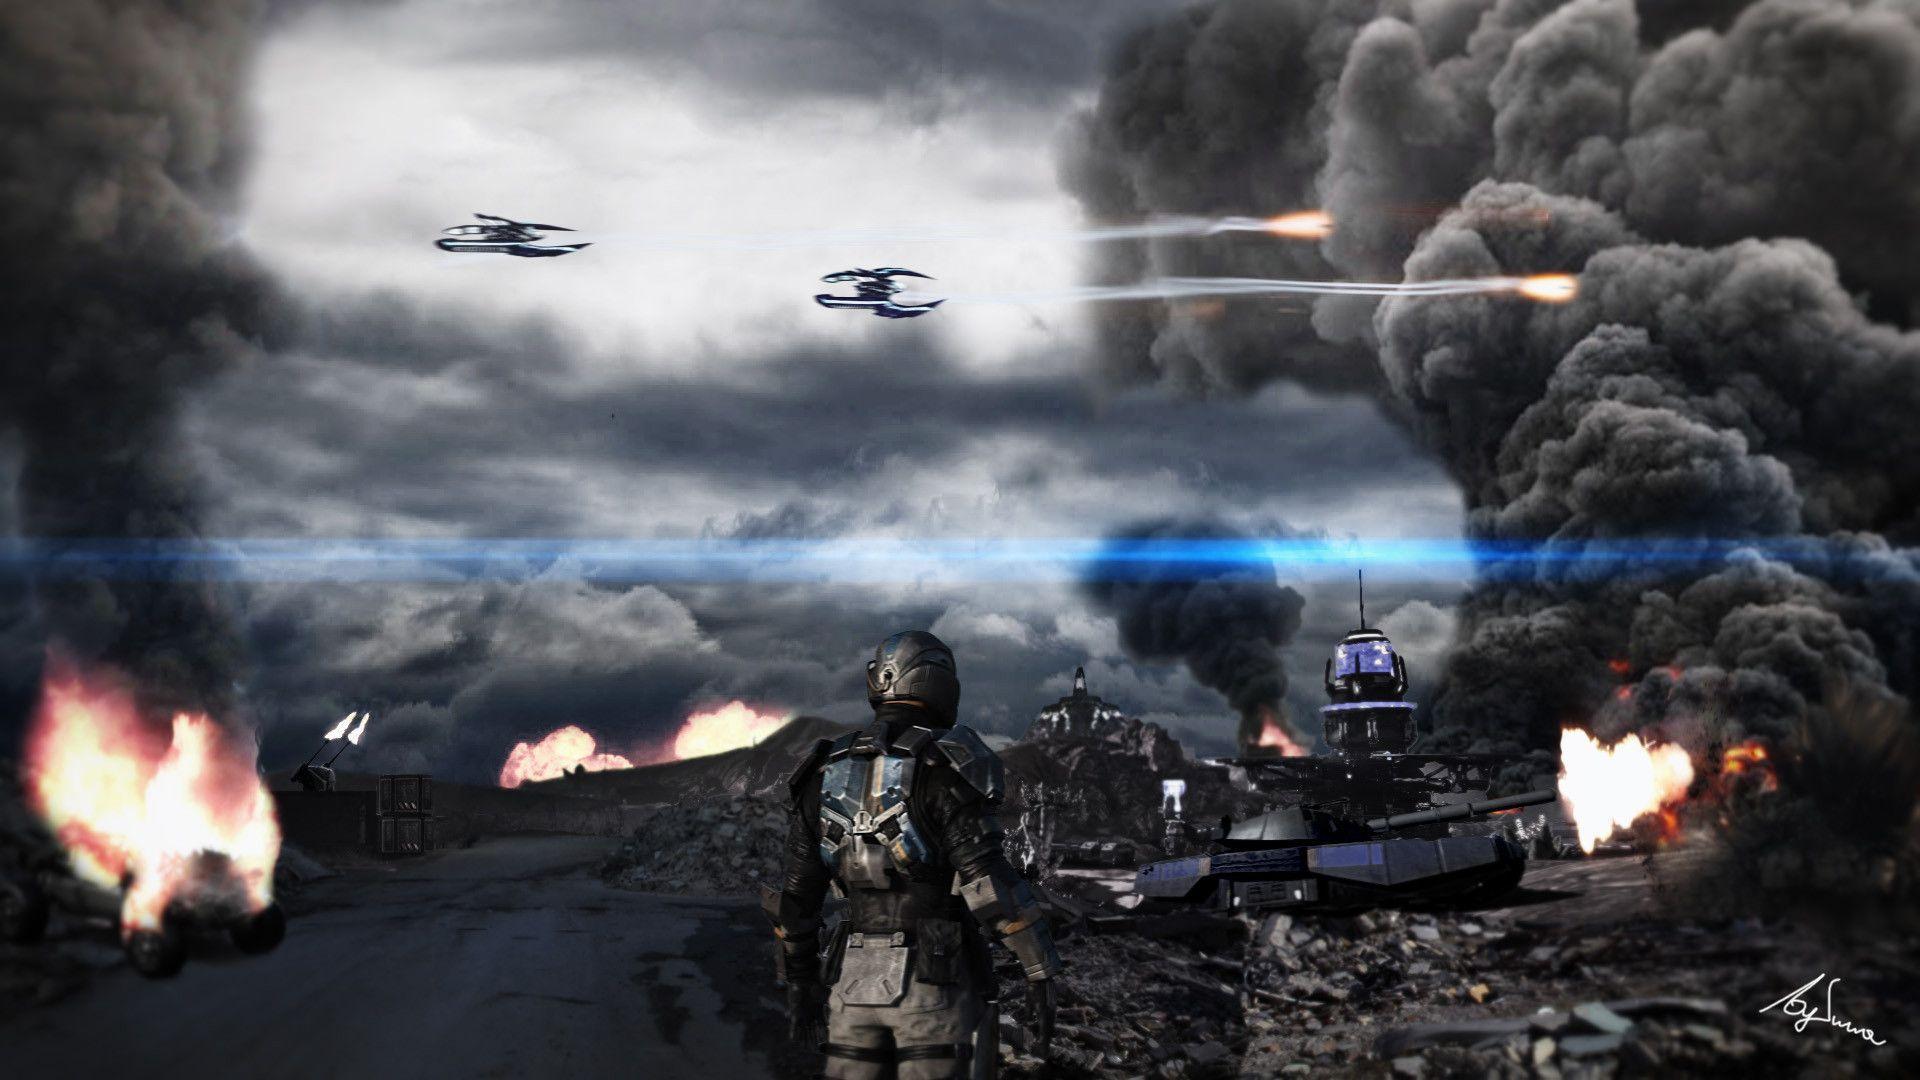 Planetside 2 Wallpaper Photo Manipulation, Inspired By Some